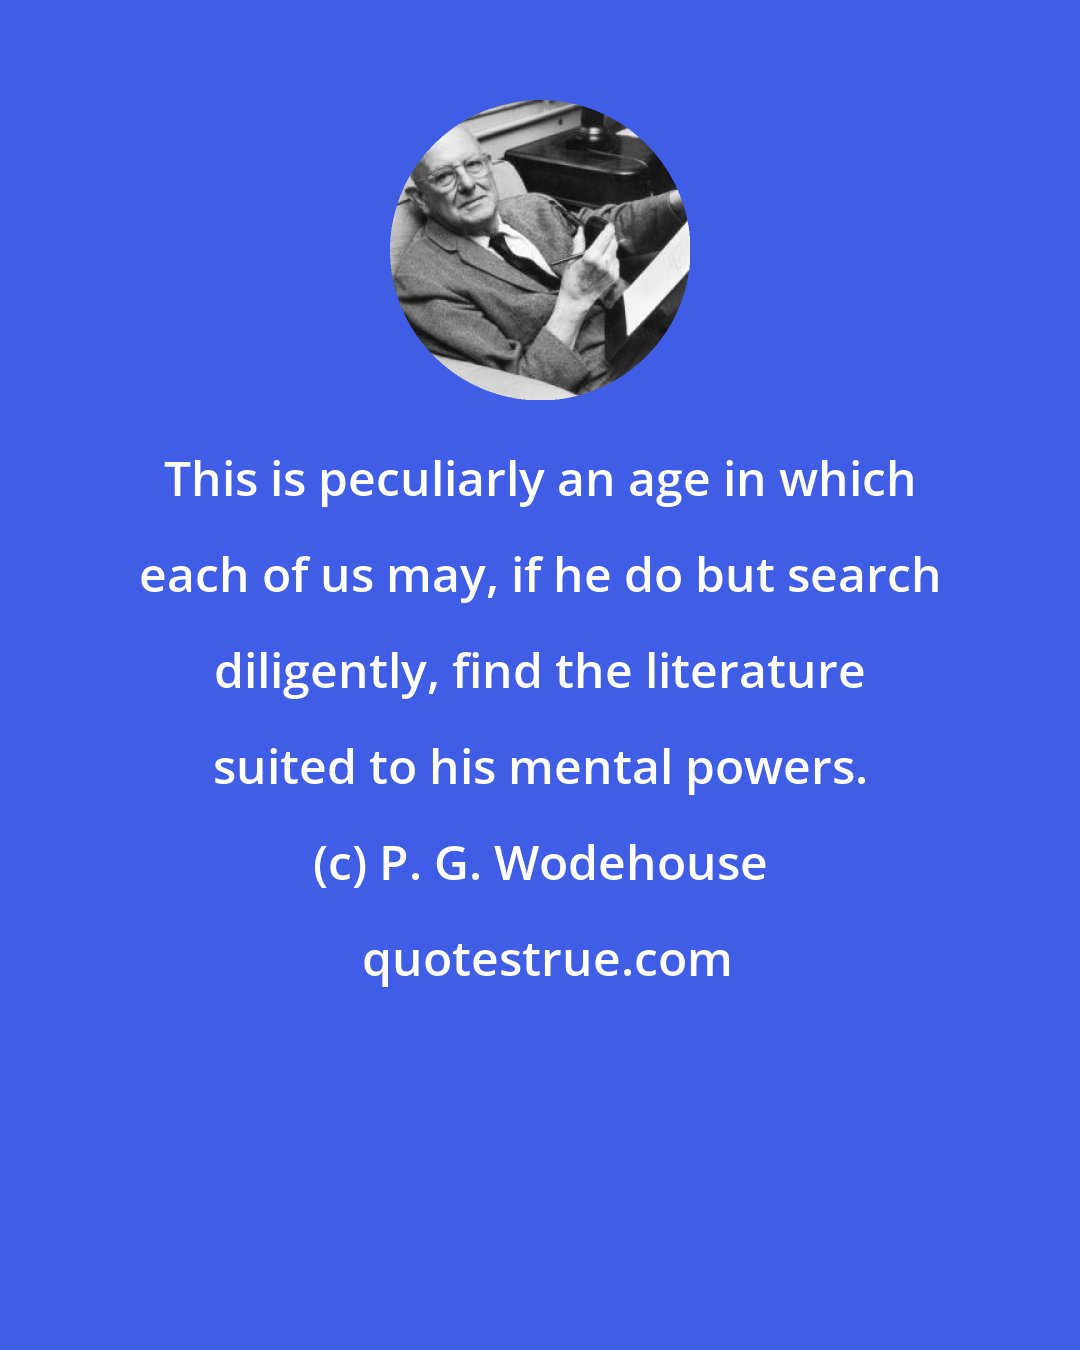 P. G. Wodehouse: This is peculiarly an age in which each of us may, if he do but search diligently, find the literature suited to his mental powers.